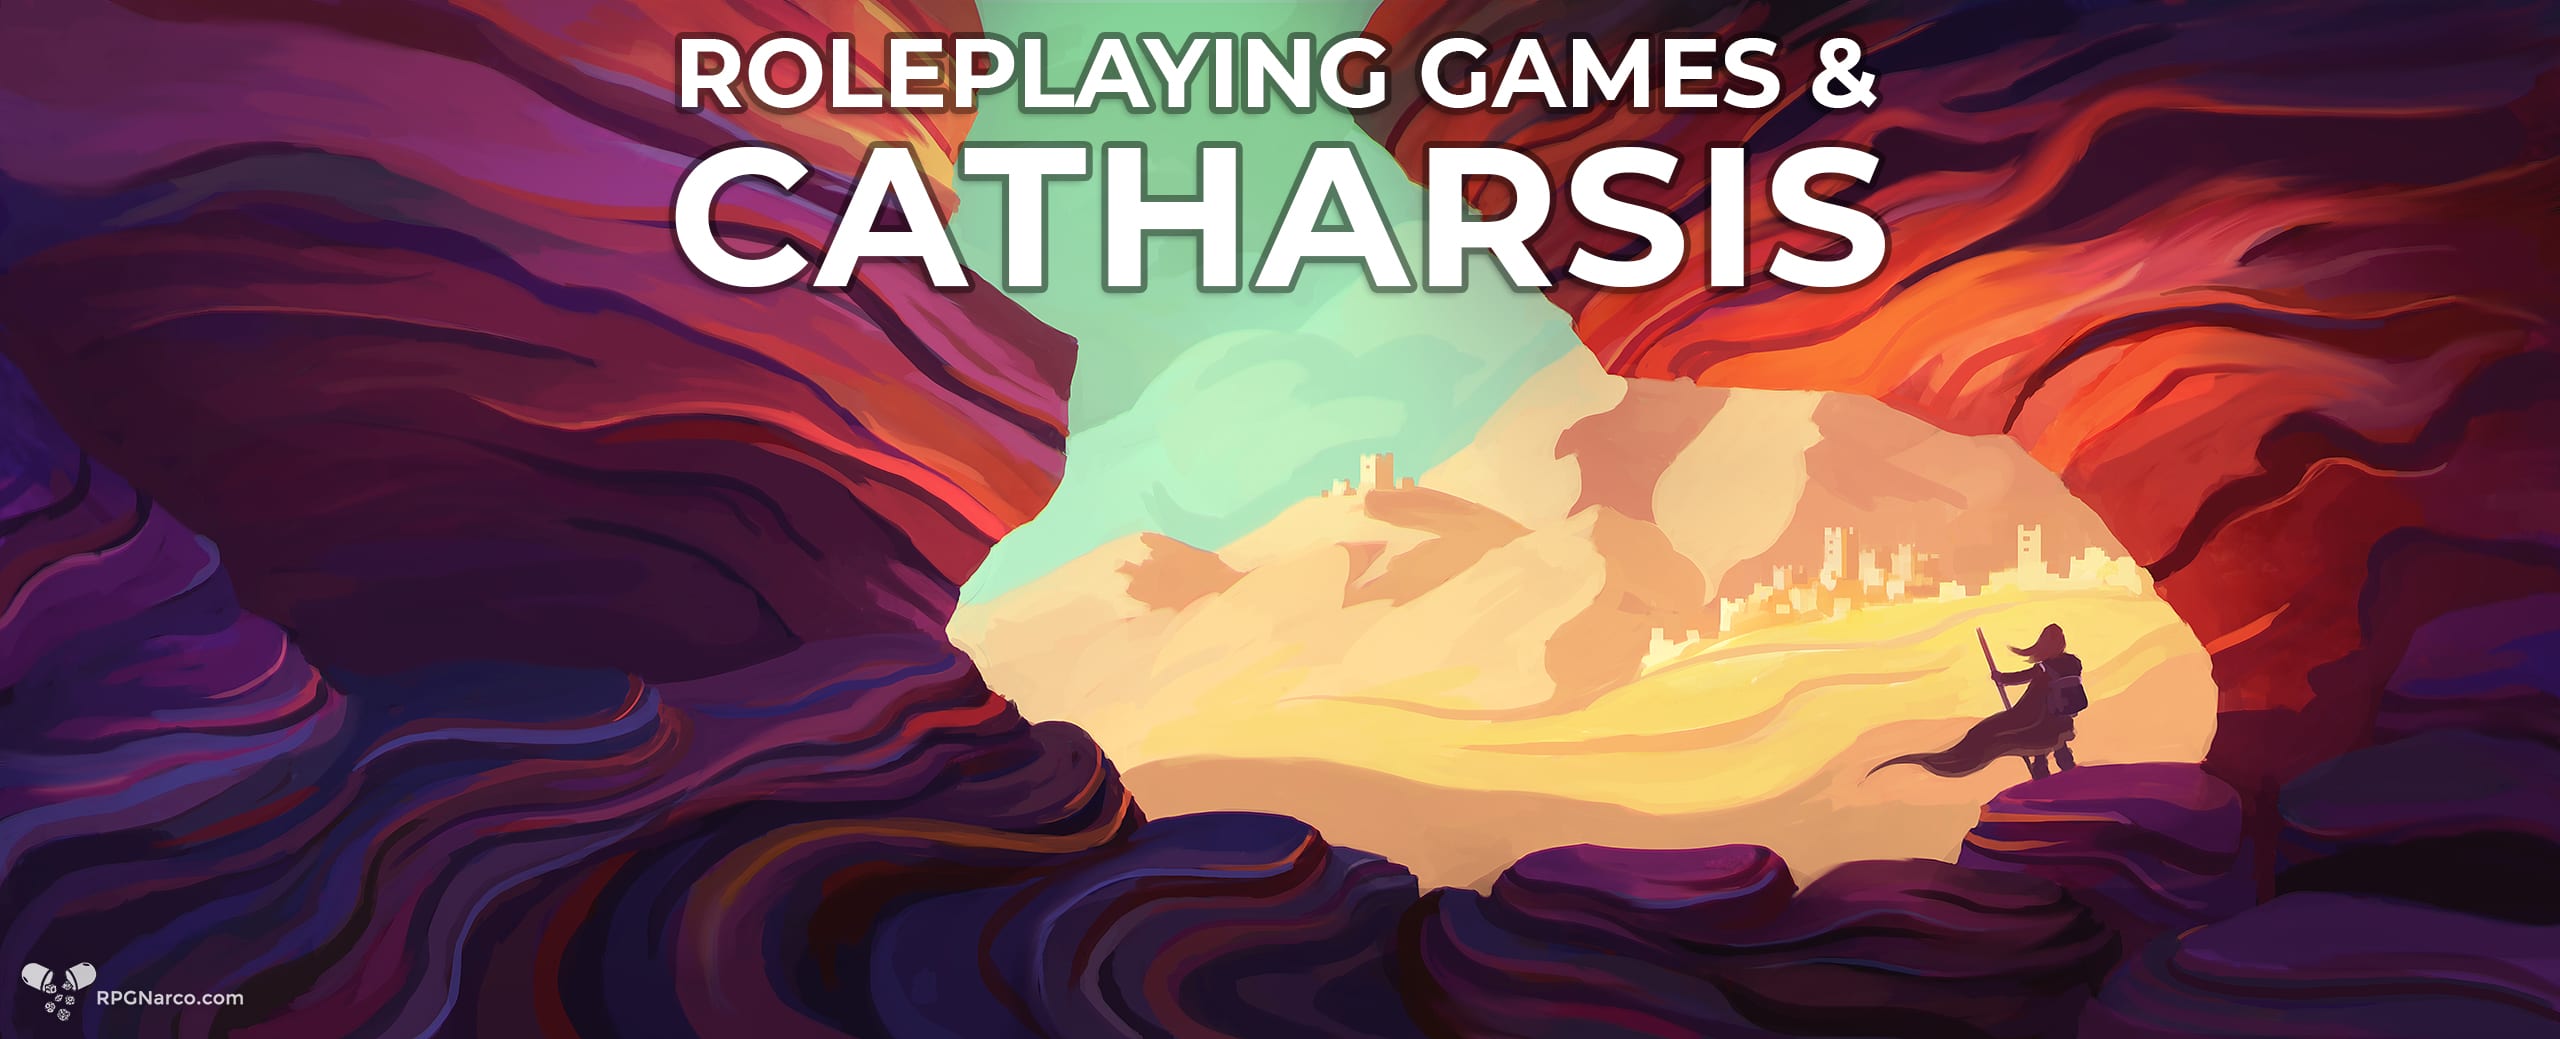 Roleplaying Games & Catharsis